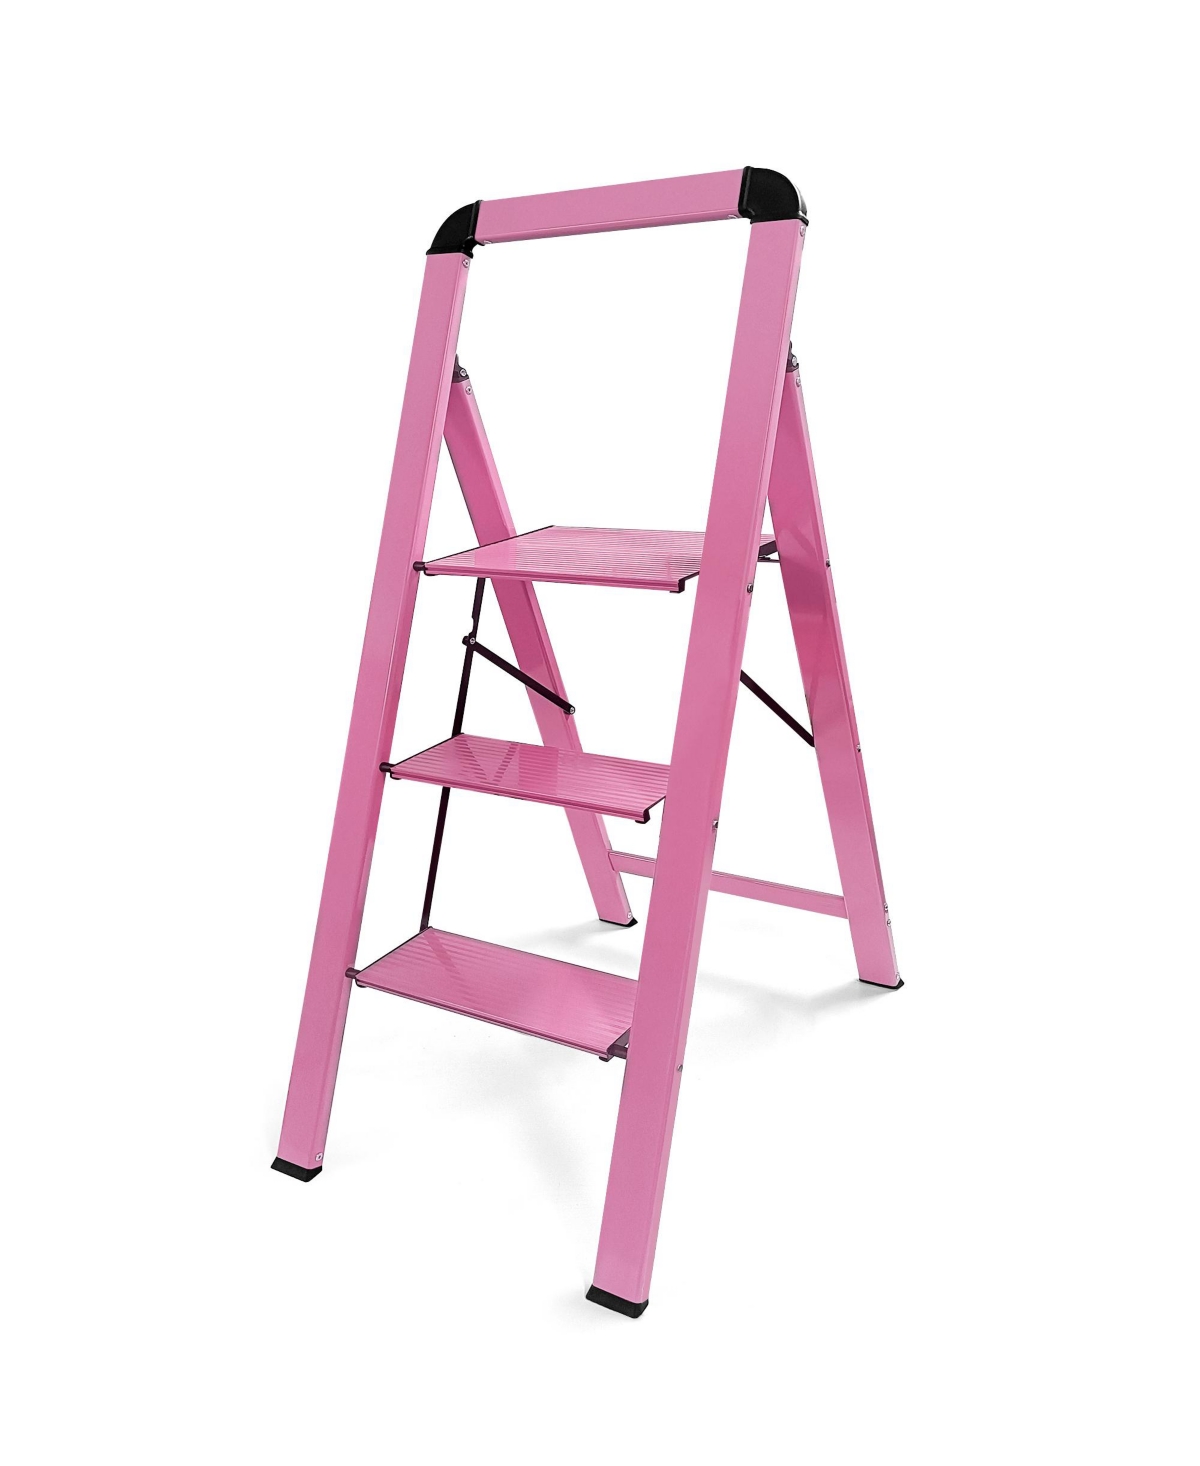 3 - Step Aluminum Folding Step Stool For Home and Garden - Pink